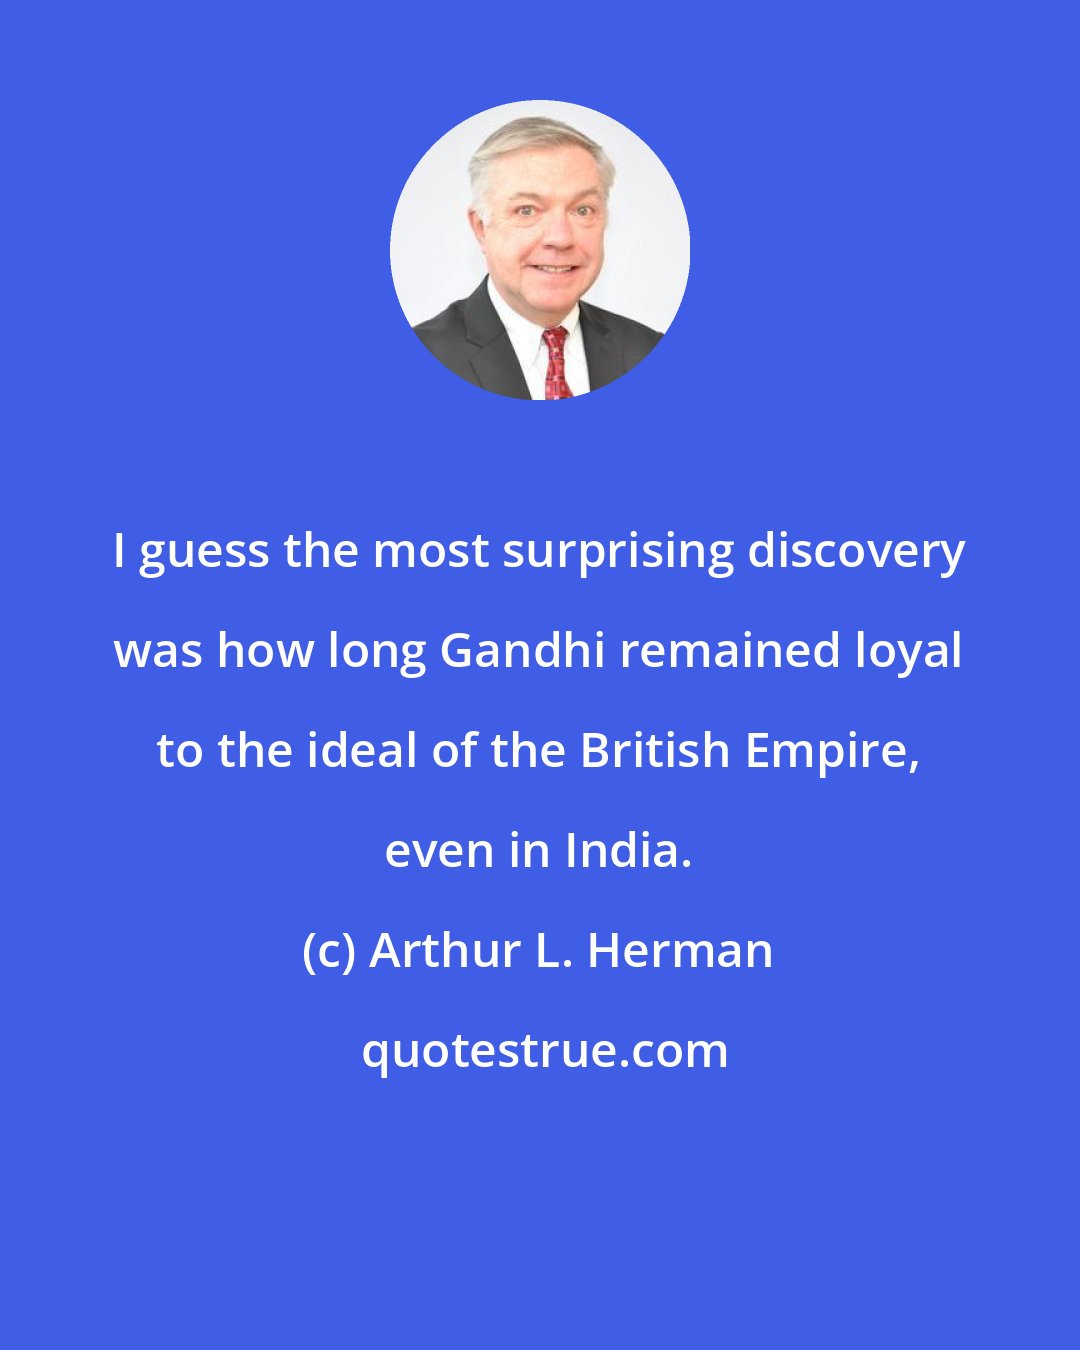 Arthur L. Herman: I guess the most surprising discovery was how long Gandhi remained loyal to the ideal of the British Empire, even in India.